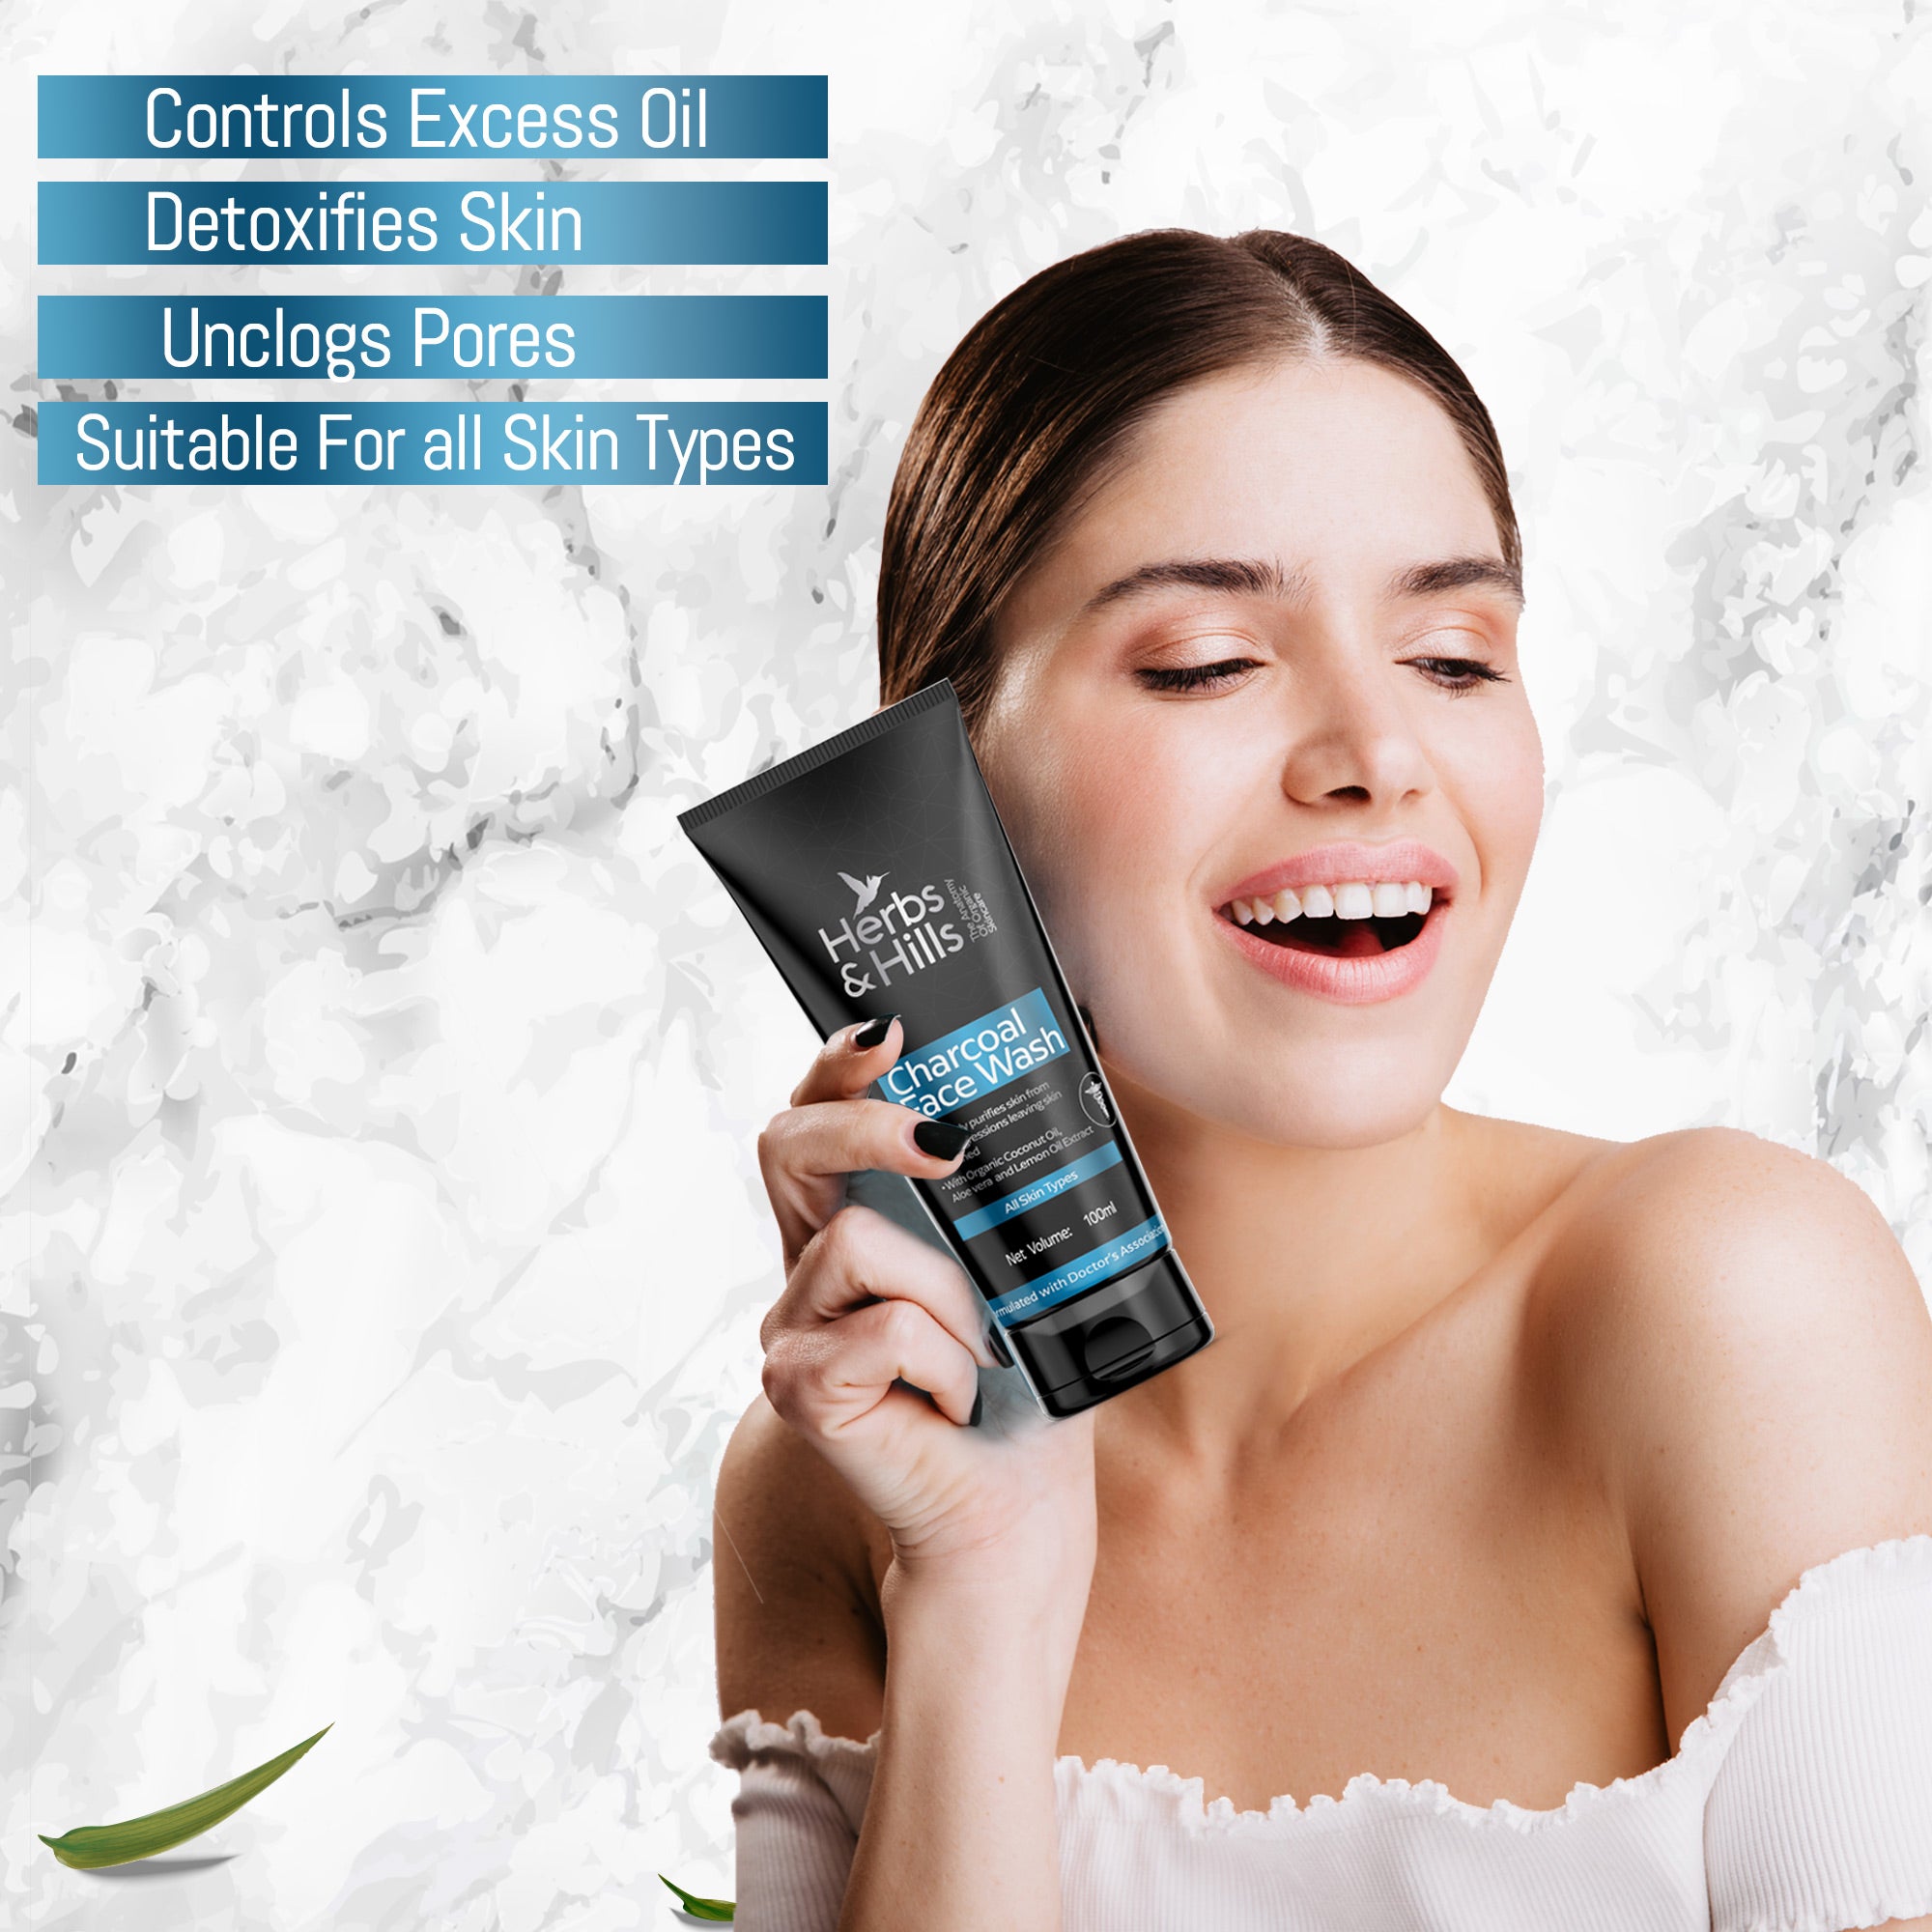 Charcoal Face Wash available in 50ml, 100ml